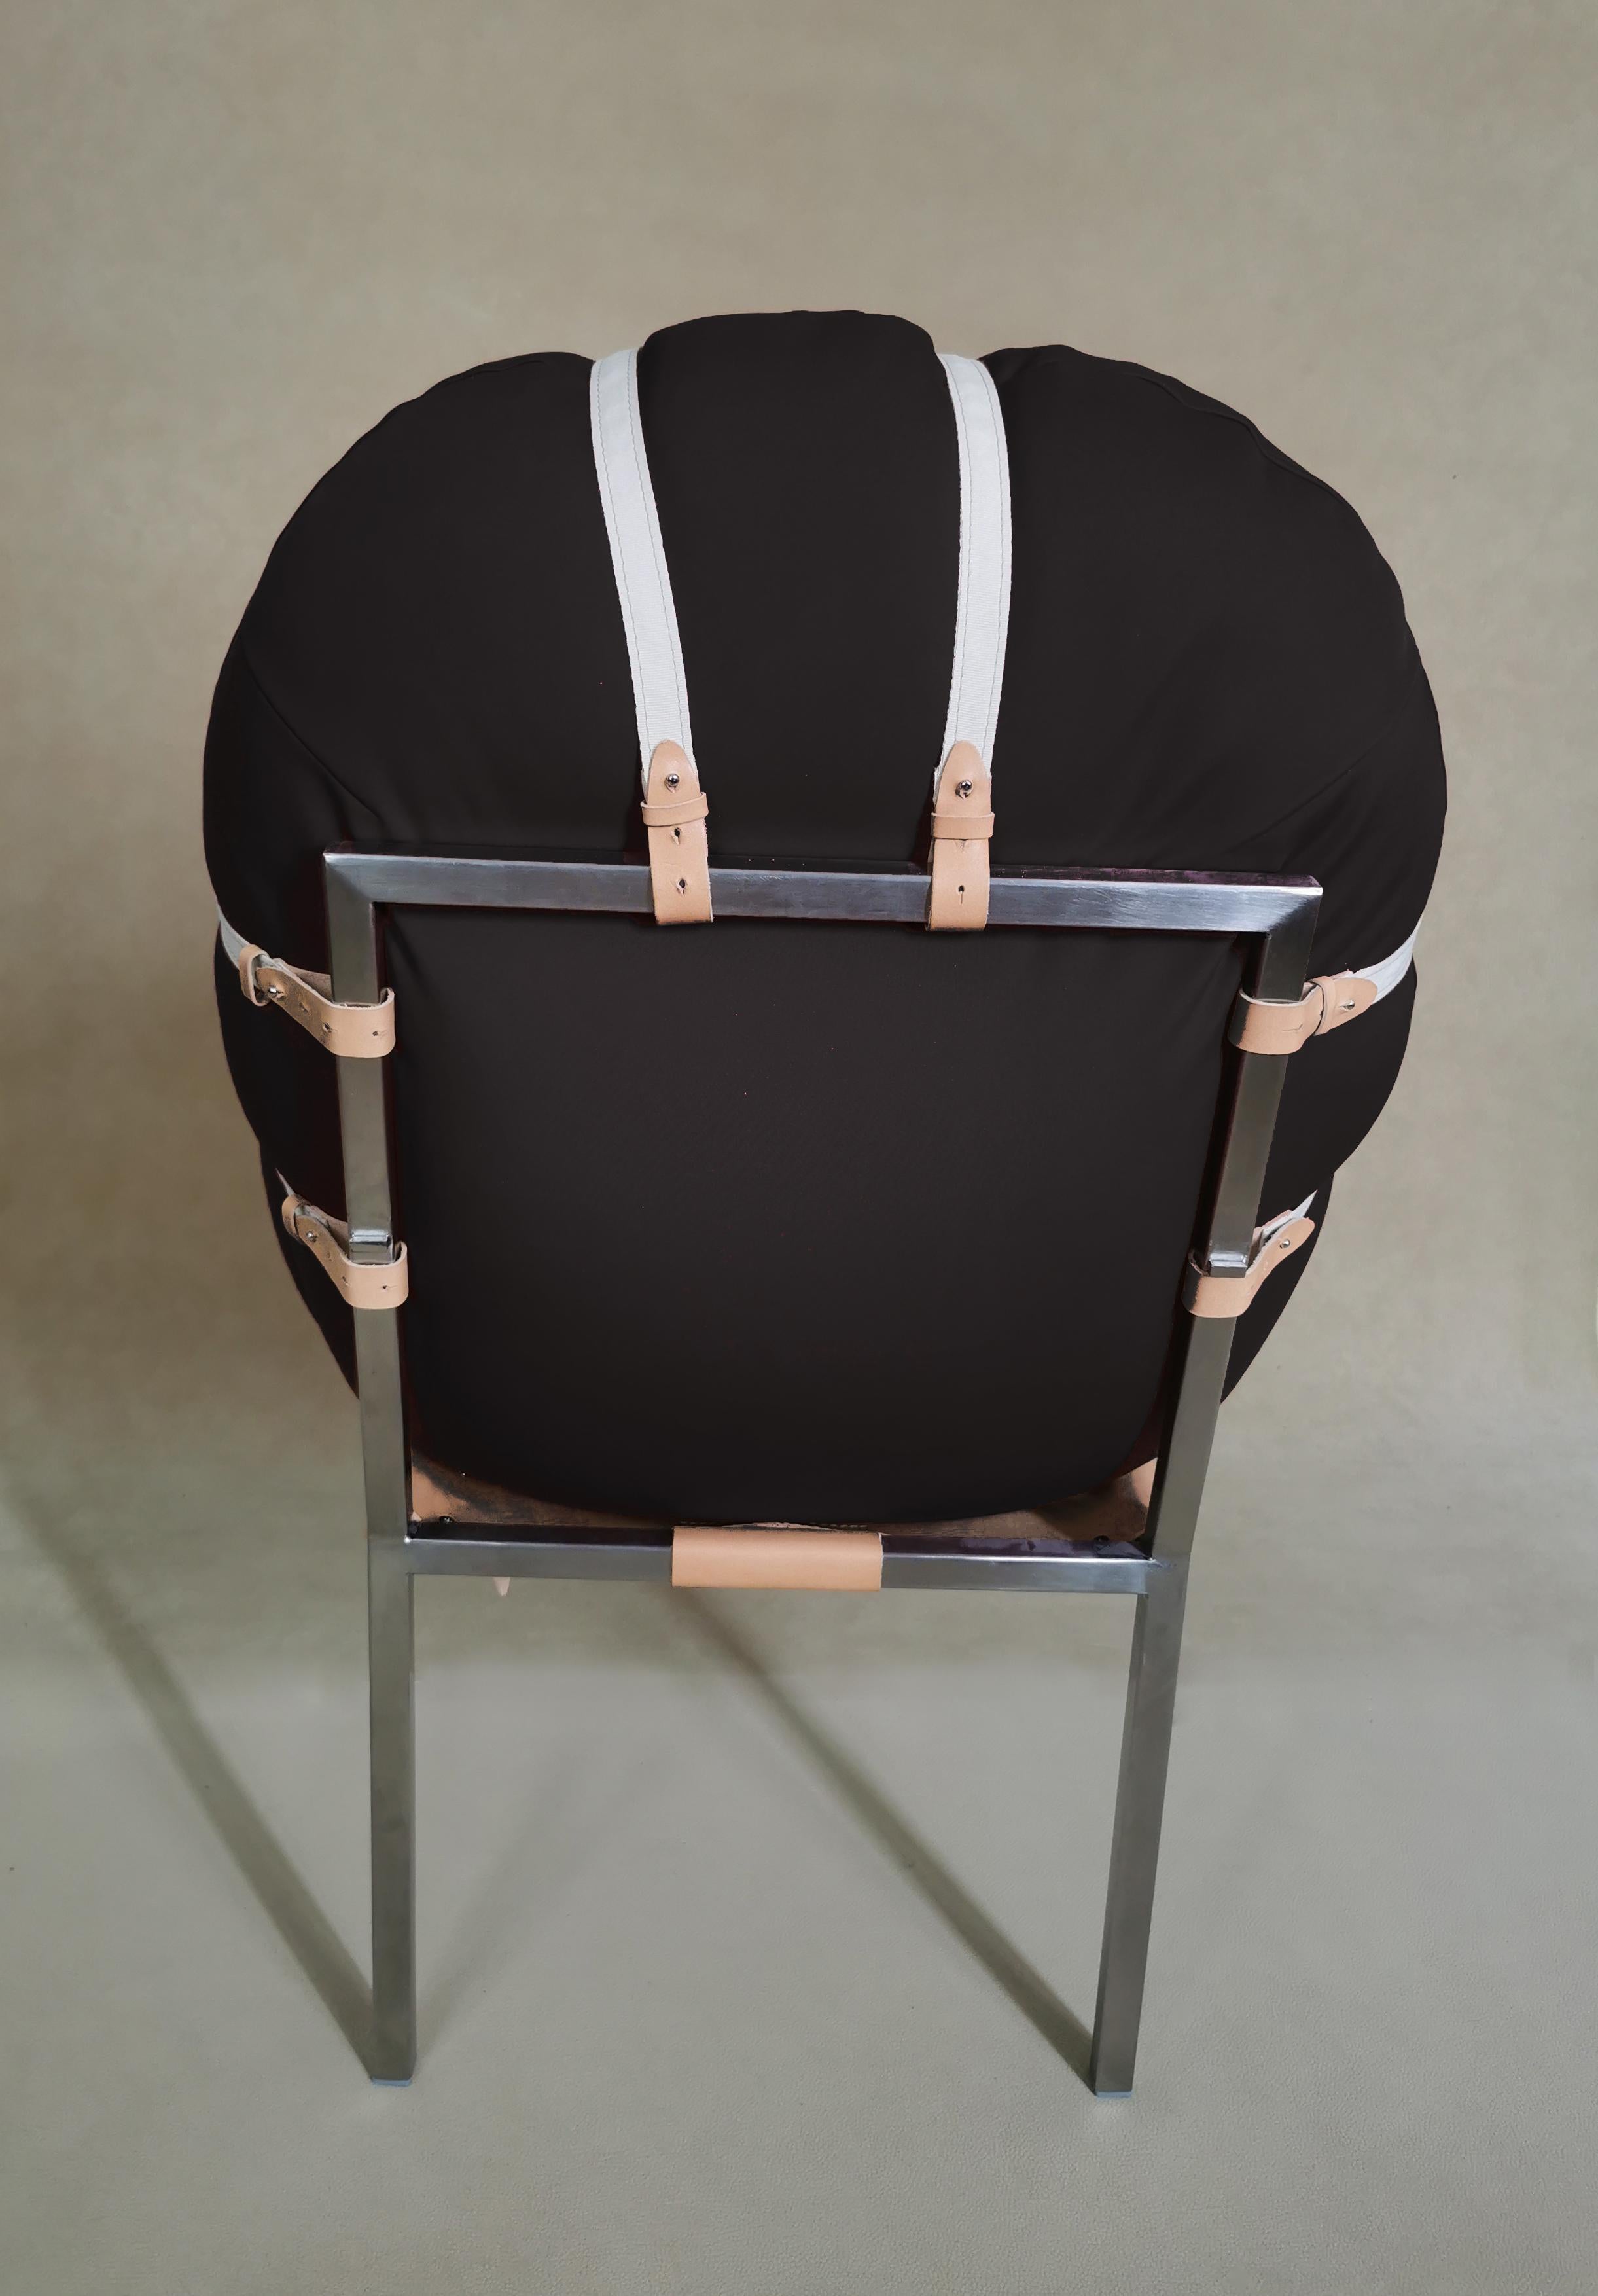 Its soft, almost carnal cushion changes shape, adapting to the weight of the body that occupies it, accommodating it, adjusting to its size and swelling around the ropes that hold it. Despite the efforts of the ropes to confine it, the chair body